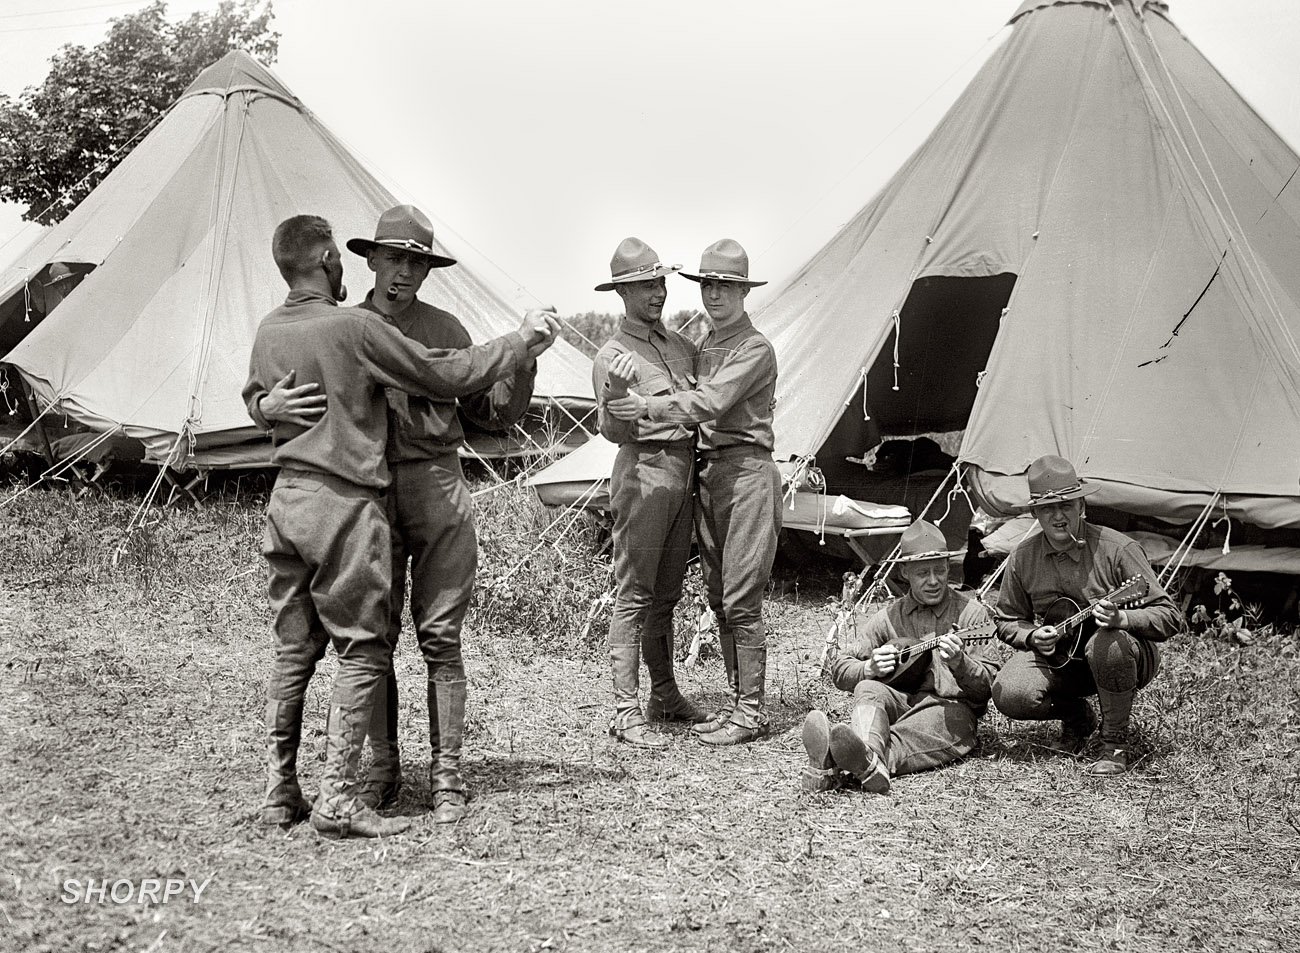 June 21, 1917. Monmouth Park, New Jersey. "Signal Corps men dancing." 5x7 glass negative, George Grantham Bain Collection. View full size.